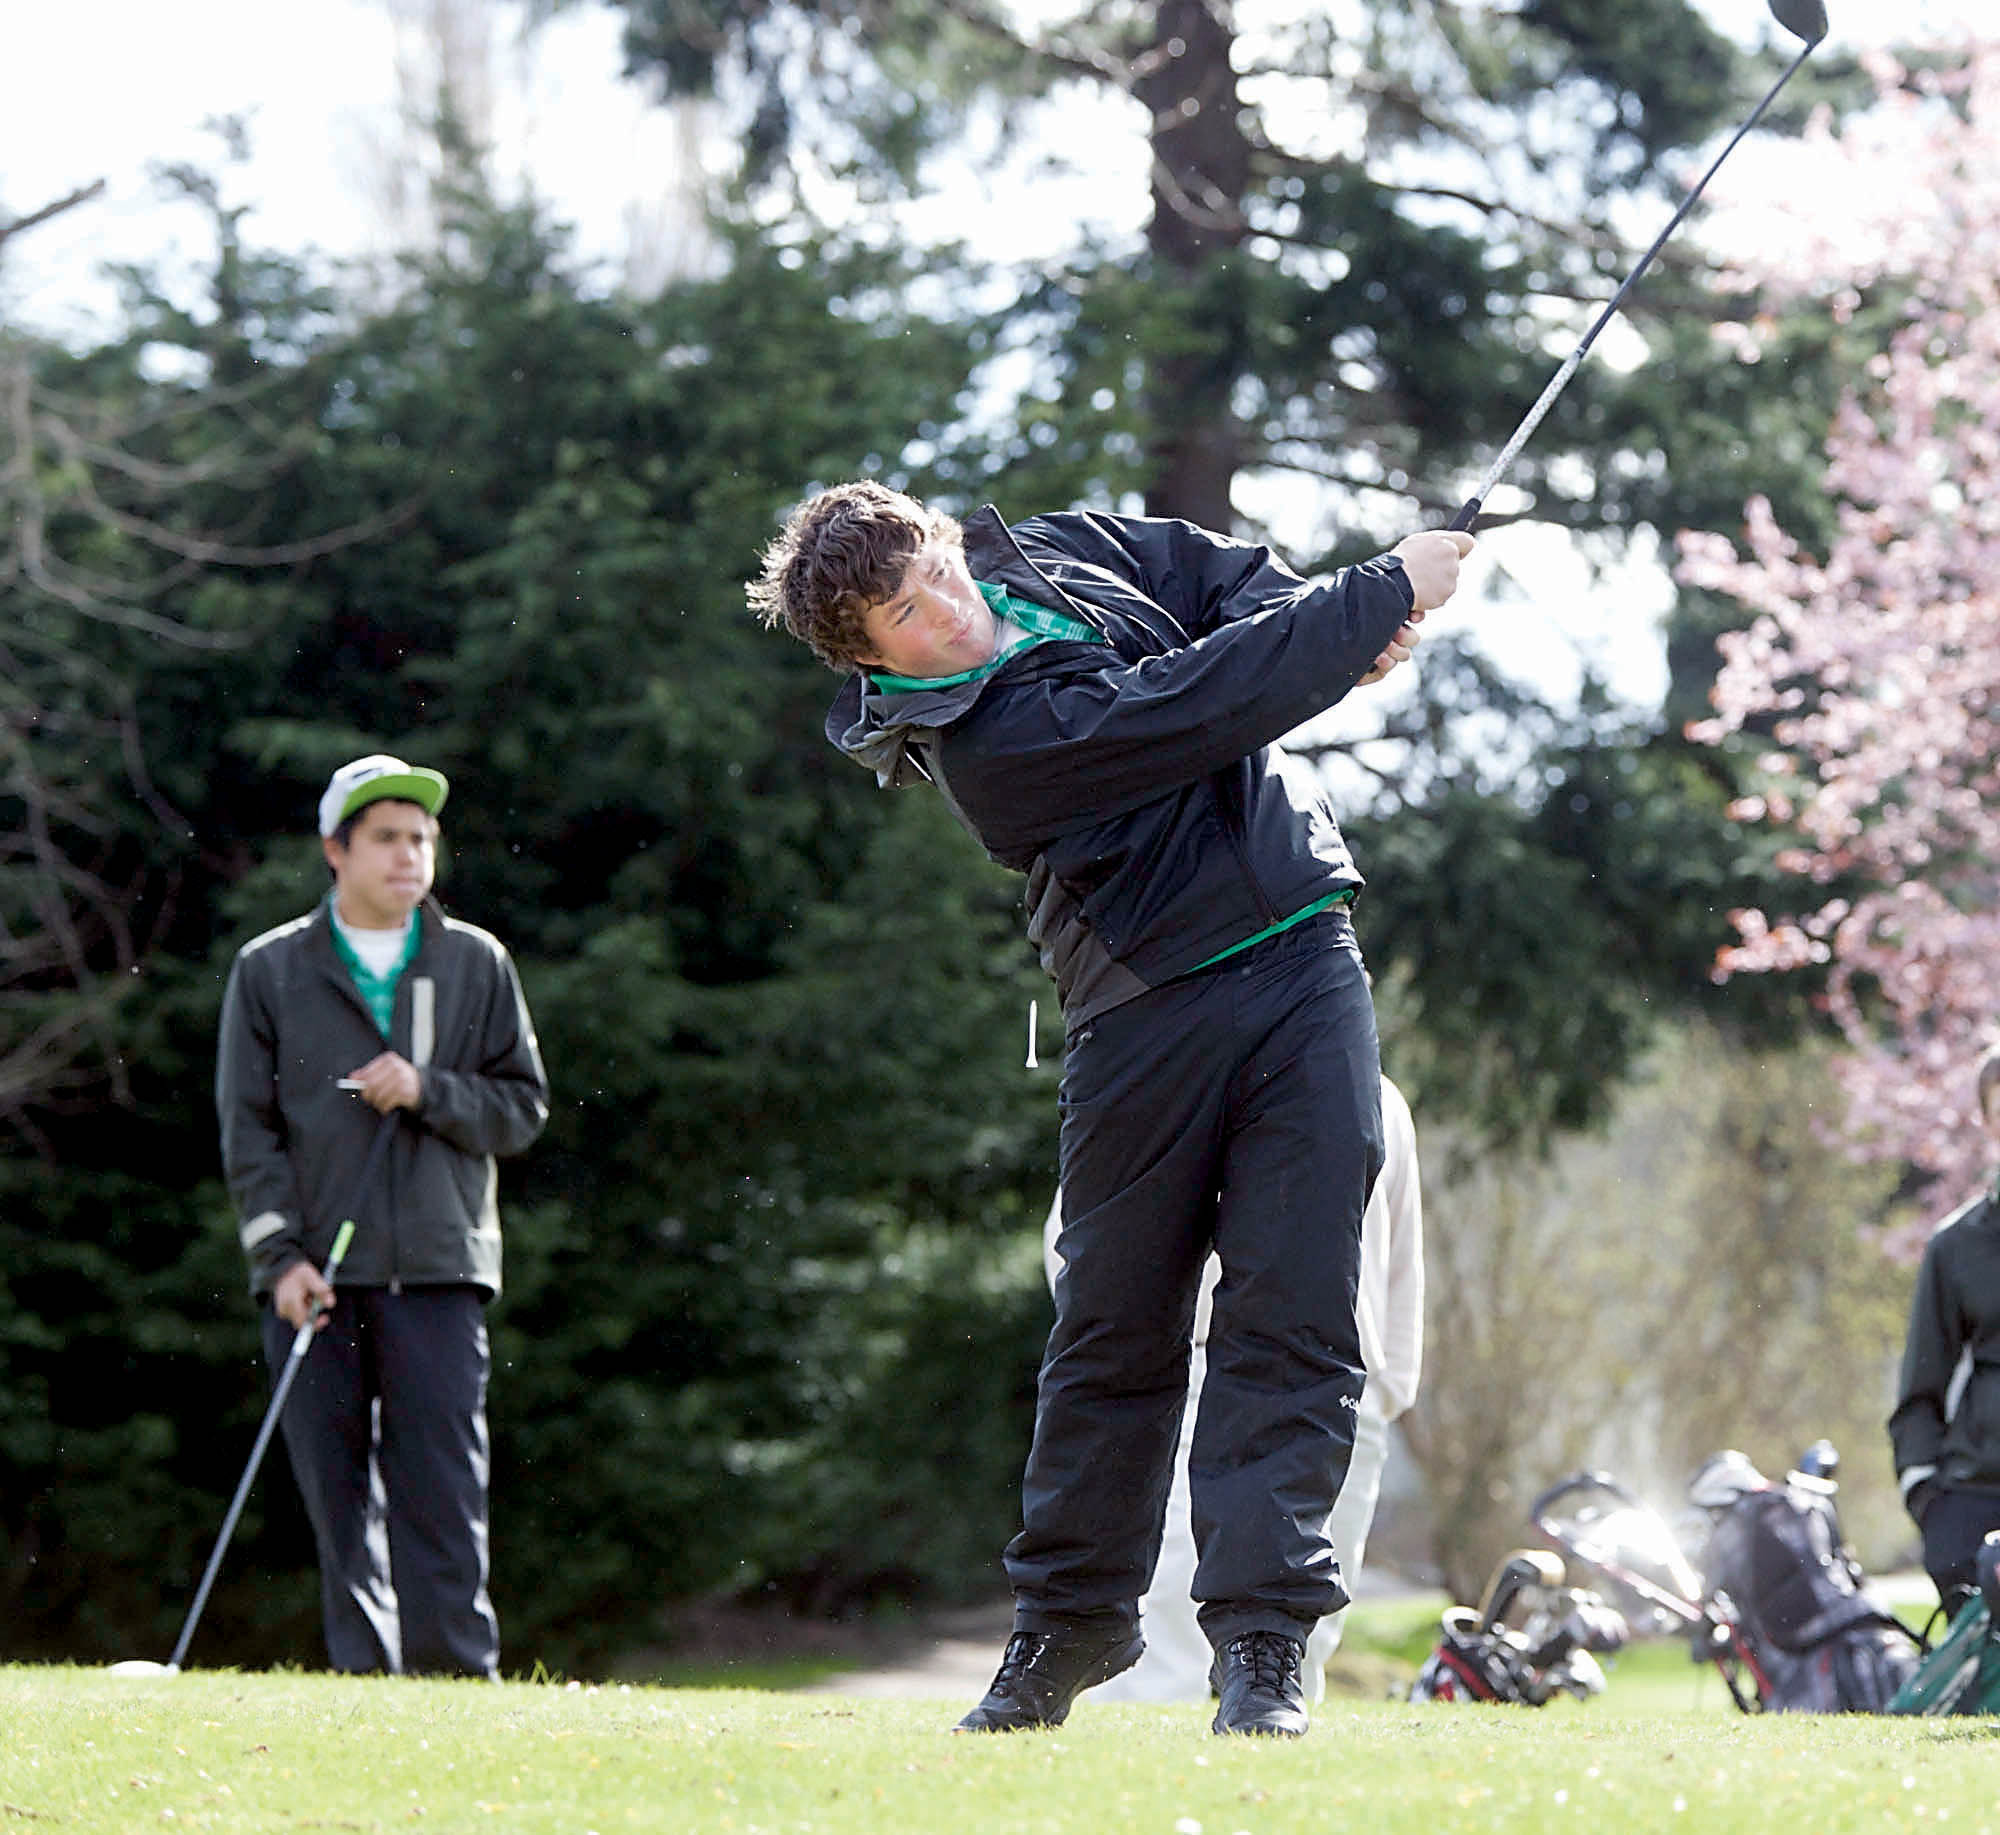 Port Angeles' Alex Atwell tees off on the first hole of a match against the Port Townsend Redskins at Port Townsend Golf Course. Steve Mullensky/for Peninsula Daily News